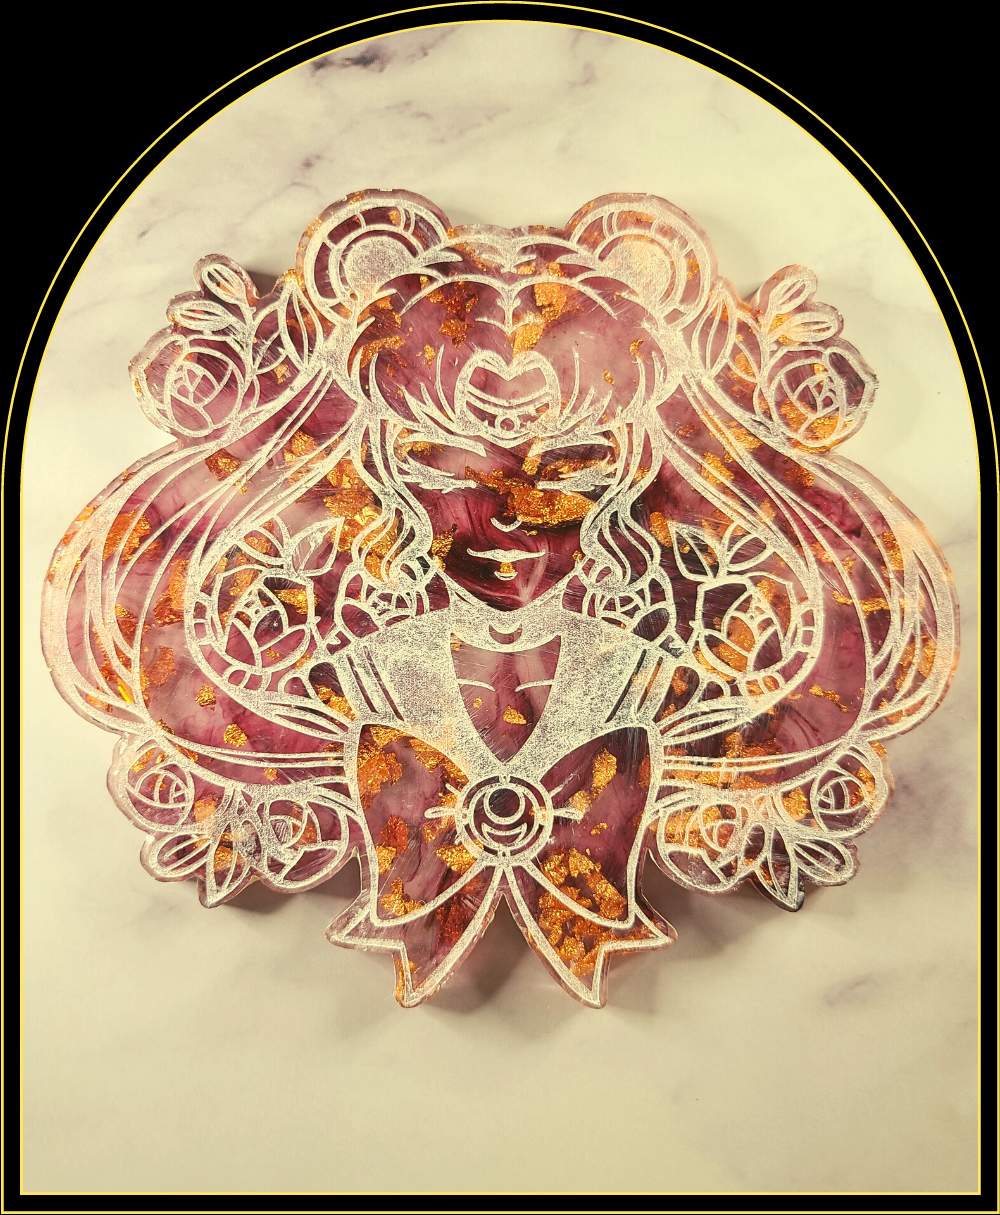 Moon Mama Wall ArtIn the name of love and justice... take home your own Sailor senshi .This 3x5" food touch safe epoxy resin piece is the perfect way to make any room more magical.TheWitchin Waifu